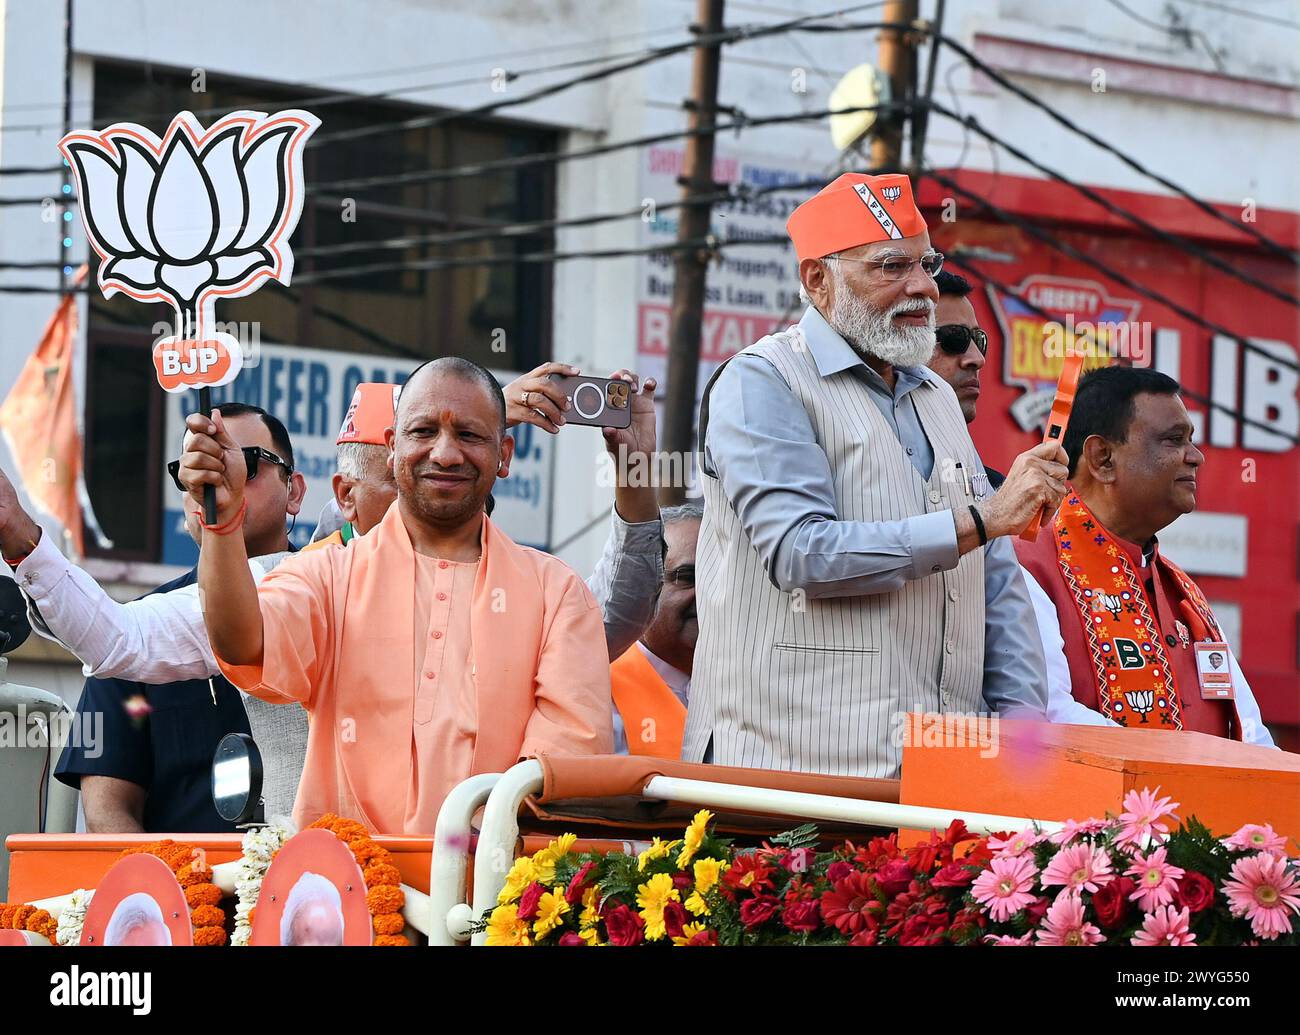 GHAZIABAD, INDIA - APRIL 6: Prime Minister Narendra Modi and Uttar Pradesh CM Yogi Adityanath holding a road show ahead of Lok Sabha Election on April 6, 2024 in Ghaziabad, India. Holding the party symbol 'lotus', PM Modi waved at the cheering crowd who greeted the four leaders with the slogans of 'Abki baar 400 paar' (400-plus seats for NDA this time), 'Har Har Modi' and 'Jai Shri Ram'. BJP first Lok Sabha election roadshow in Uttar Pradesh, canvassing support for the BJP's Ghaziabad candidate Atul Garg, who has been fielded in place of two-time MP and Union minister V K Singh. (Photo by Ajay Stock Photo